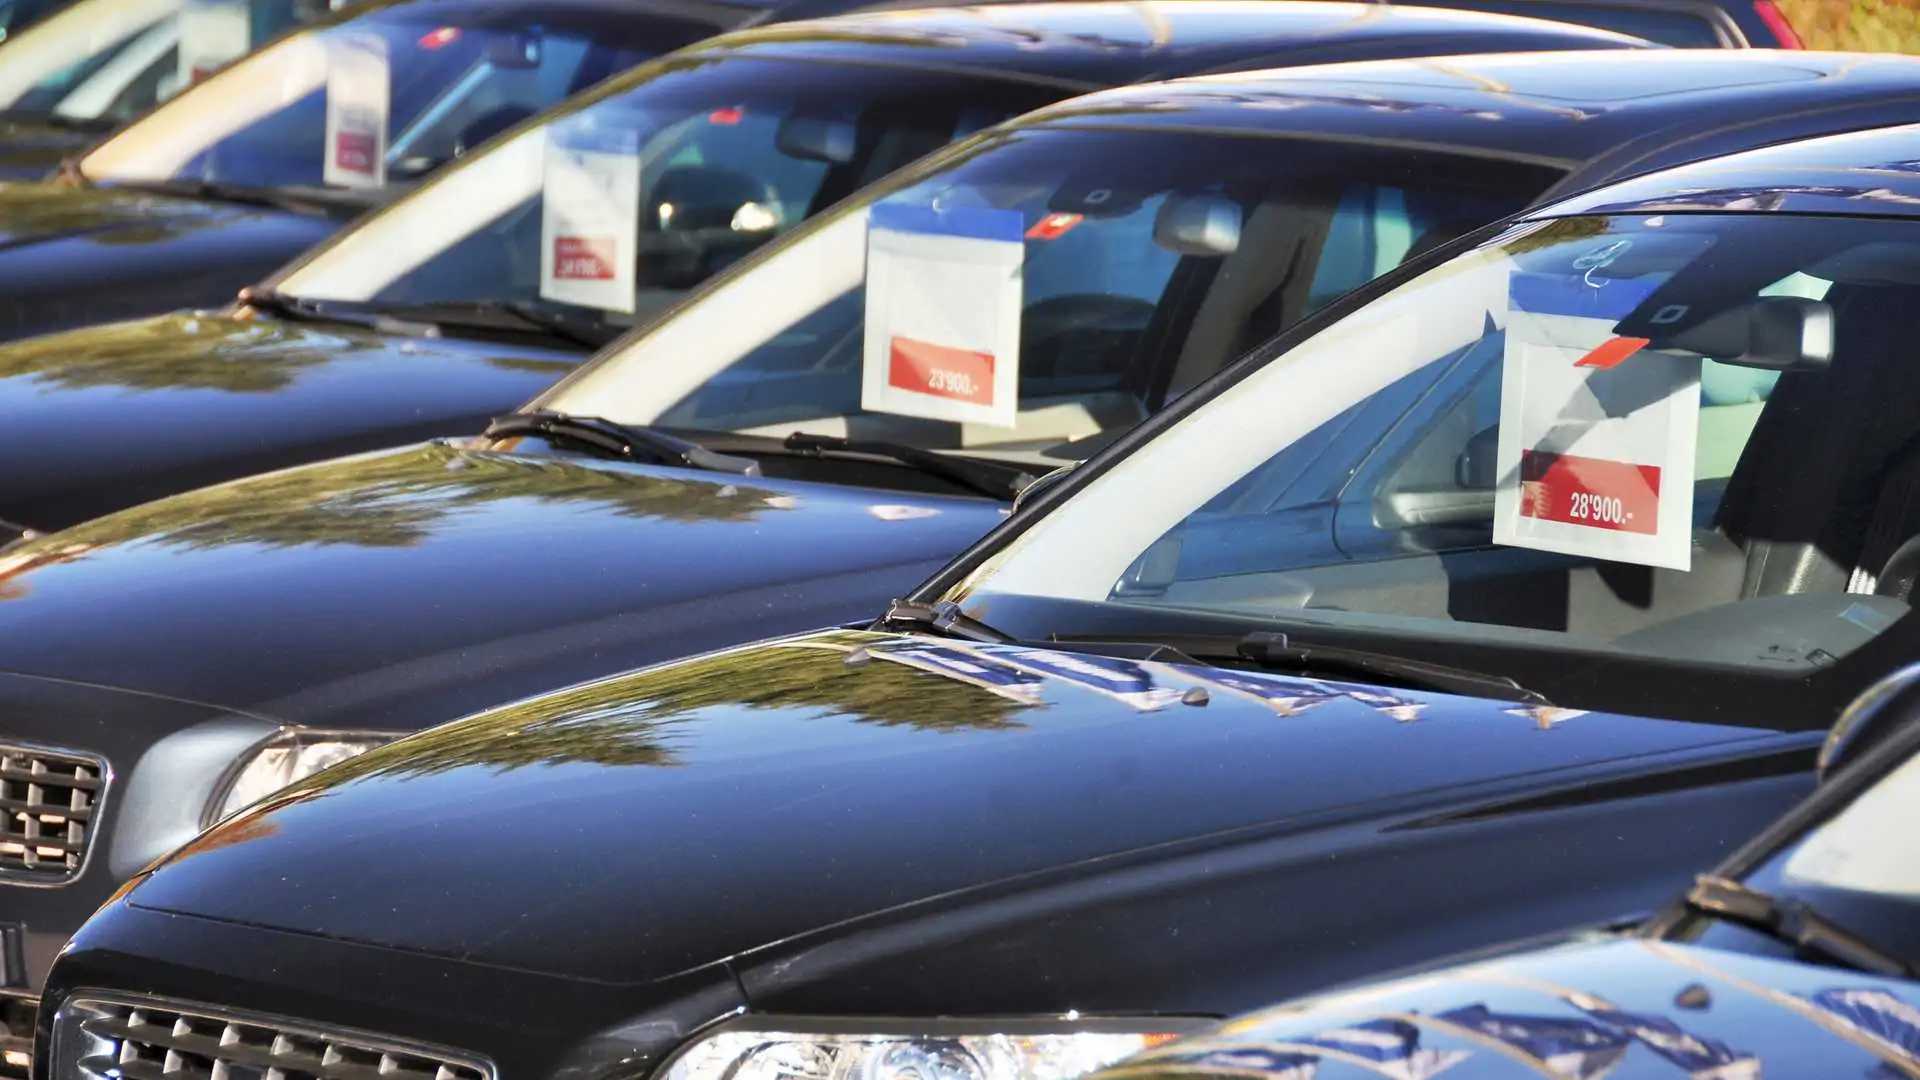 Facebook Marketplace Bans Dealers From Posting Used Cars For Sale